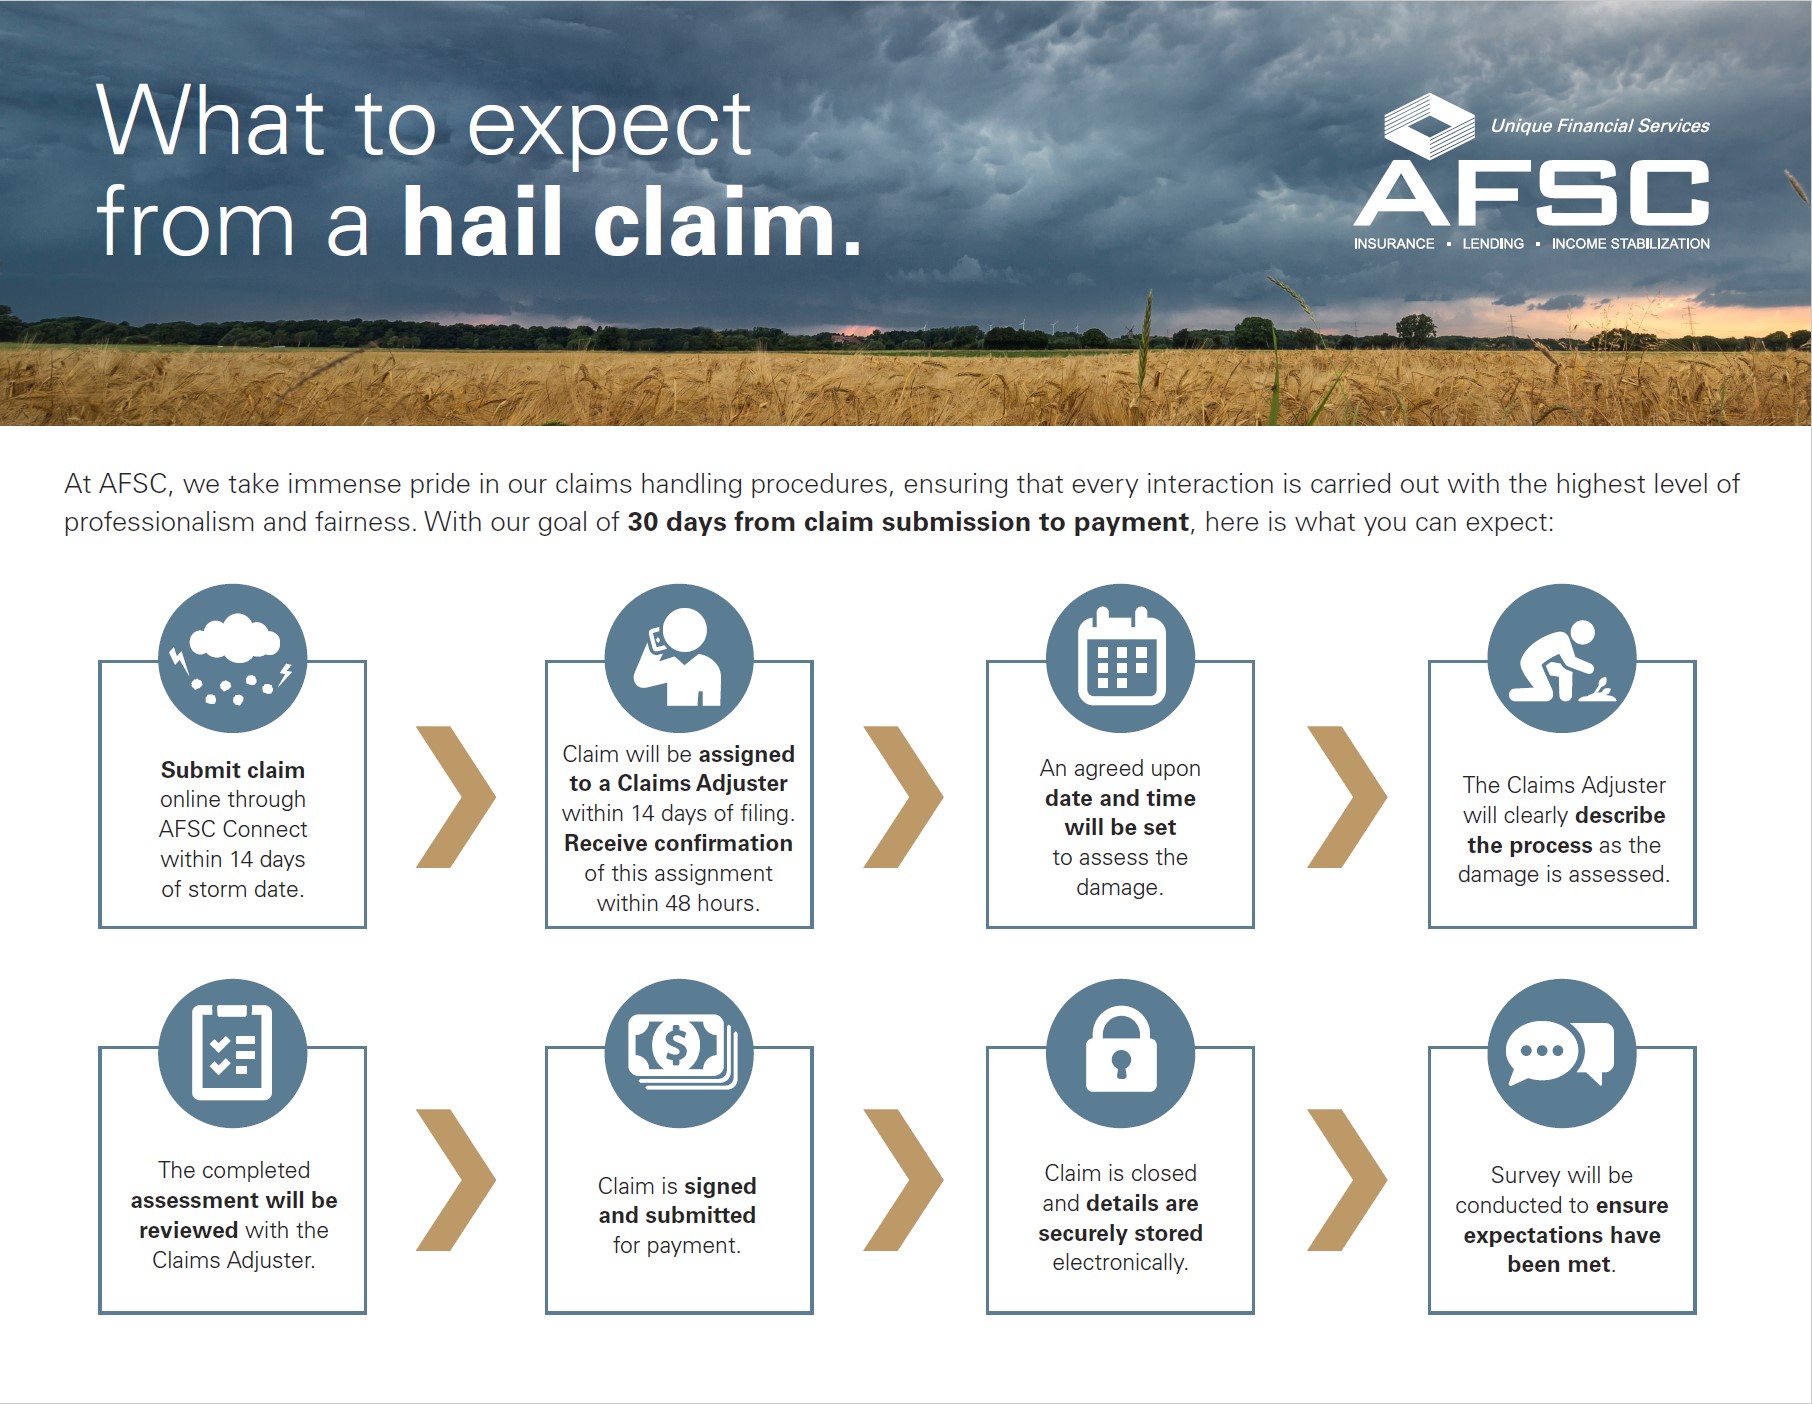 A diagram showing the hail claim process